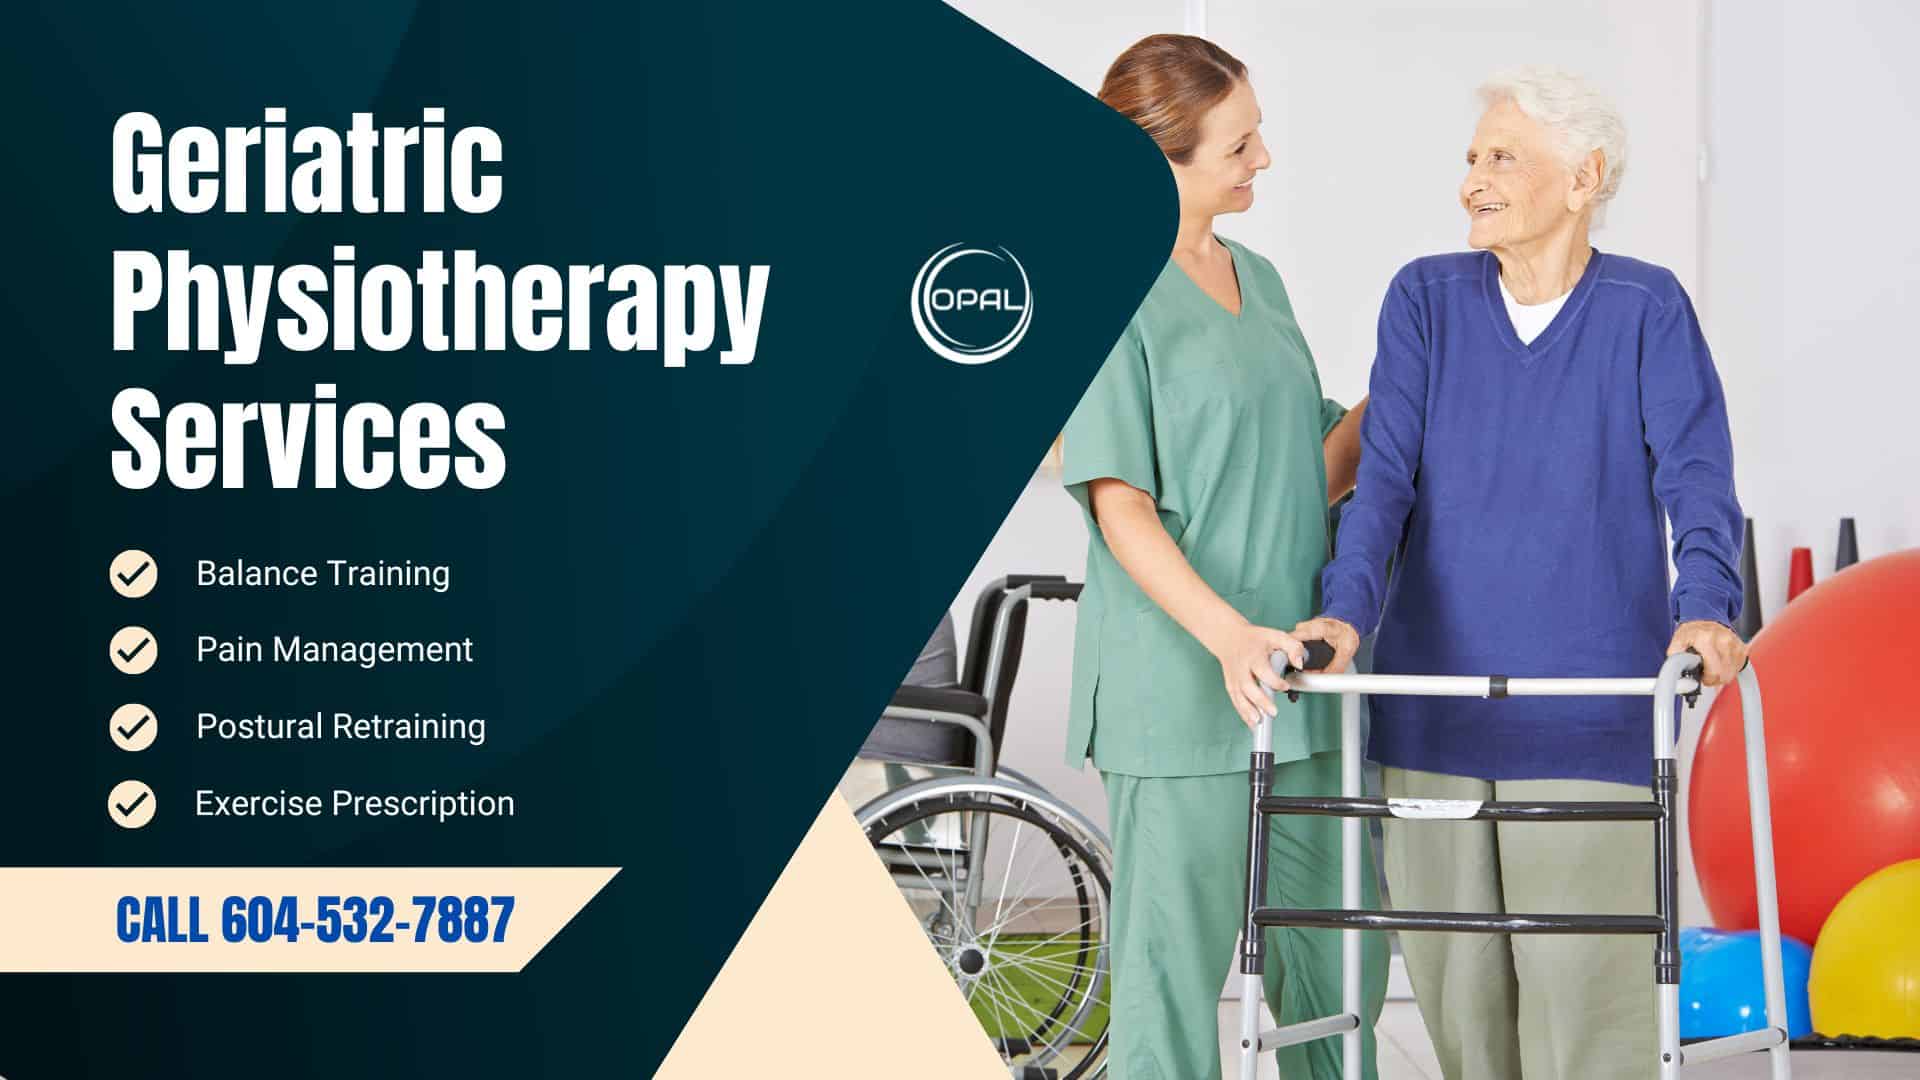 Geriatric Physiotherapy Services